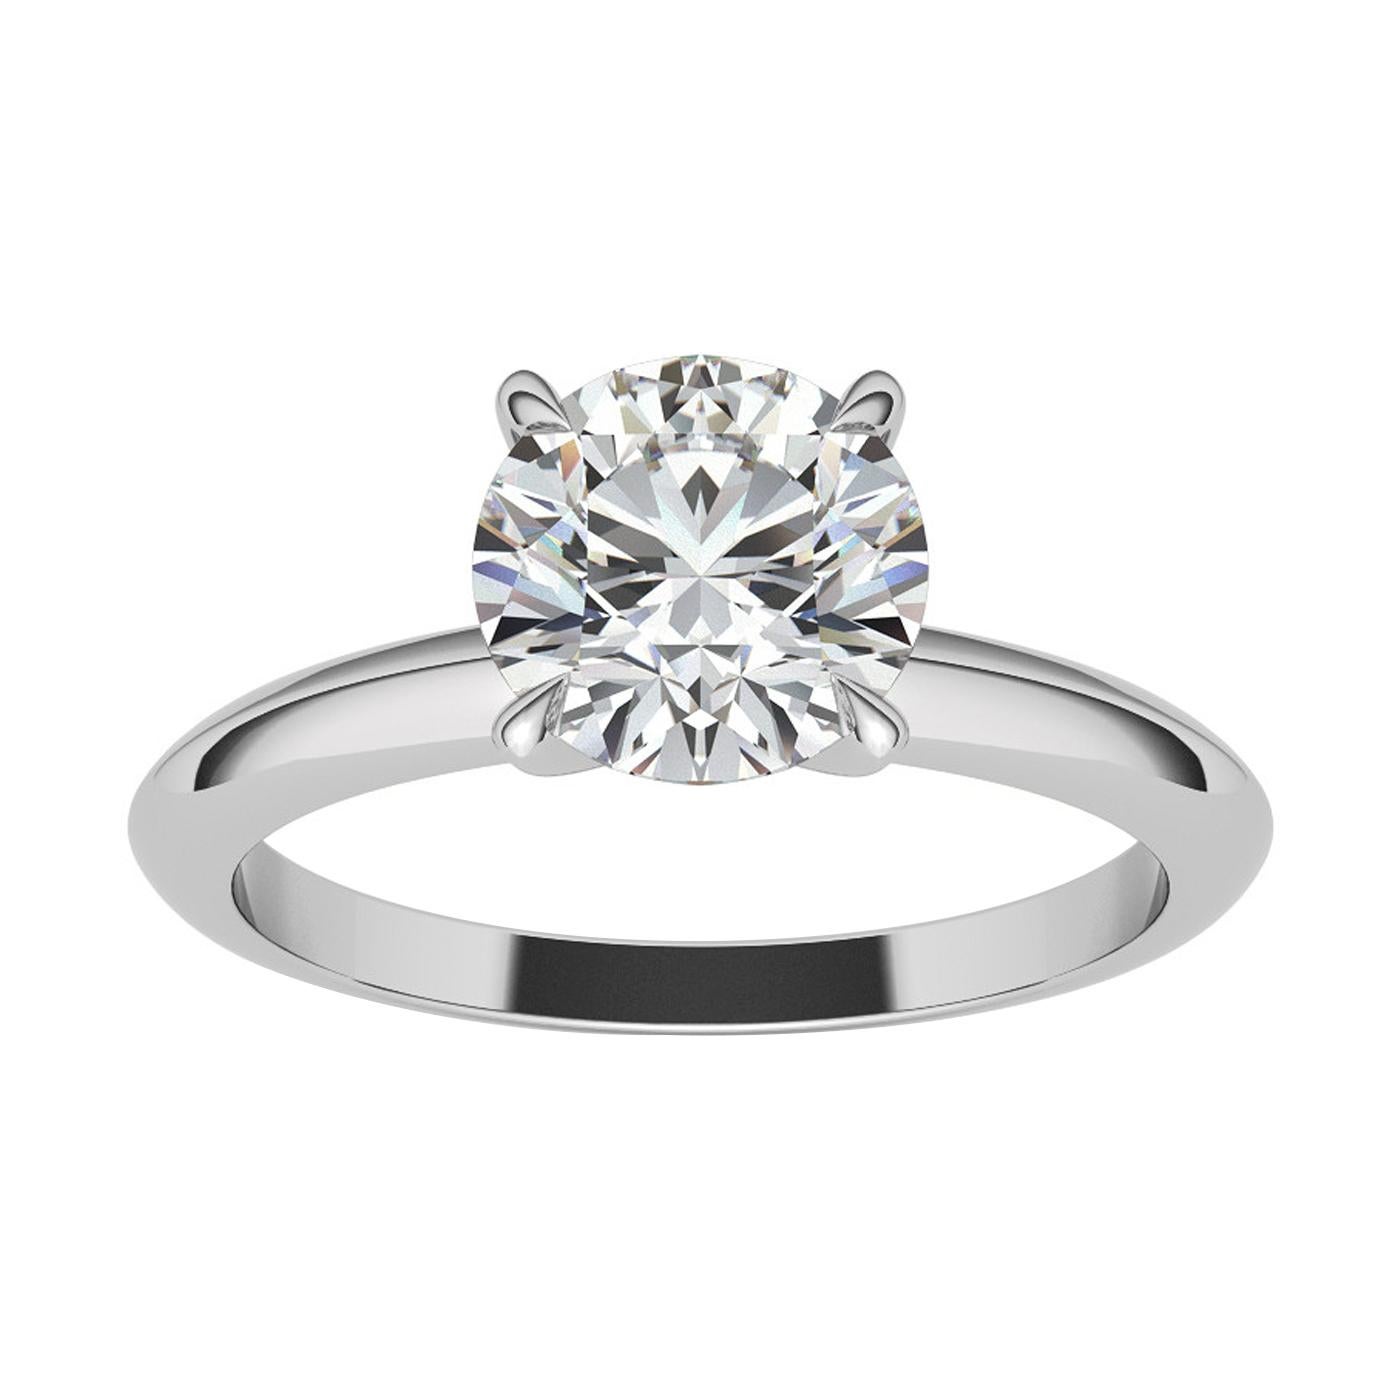 This traditional 2.41 Round Cut Tiffany Style Engagement Ring is sure to captivate her senses with its unparallel beauty while the exceptional 4-prong setting allows more light to refract from the stunning round cut radiating extraordinary